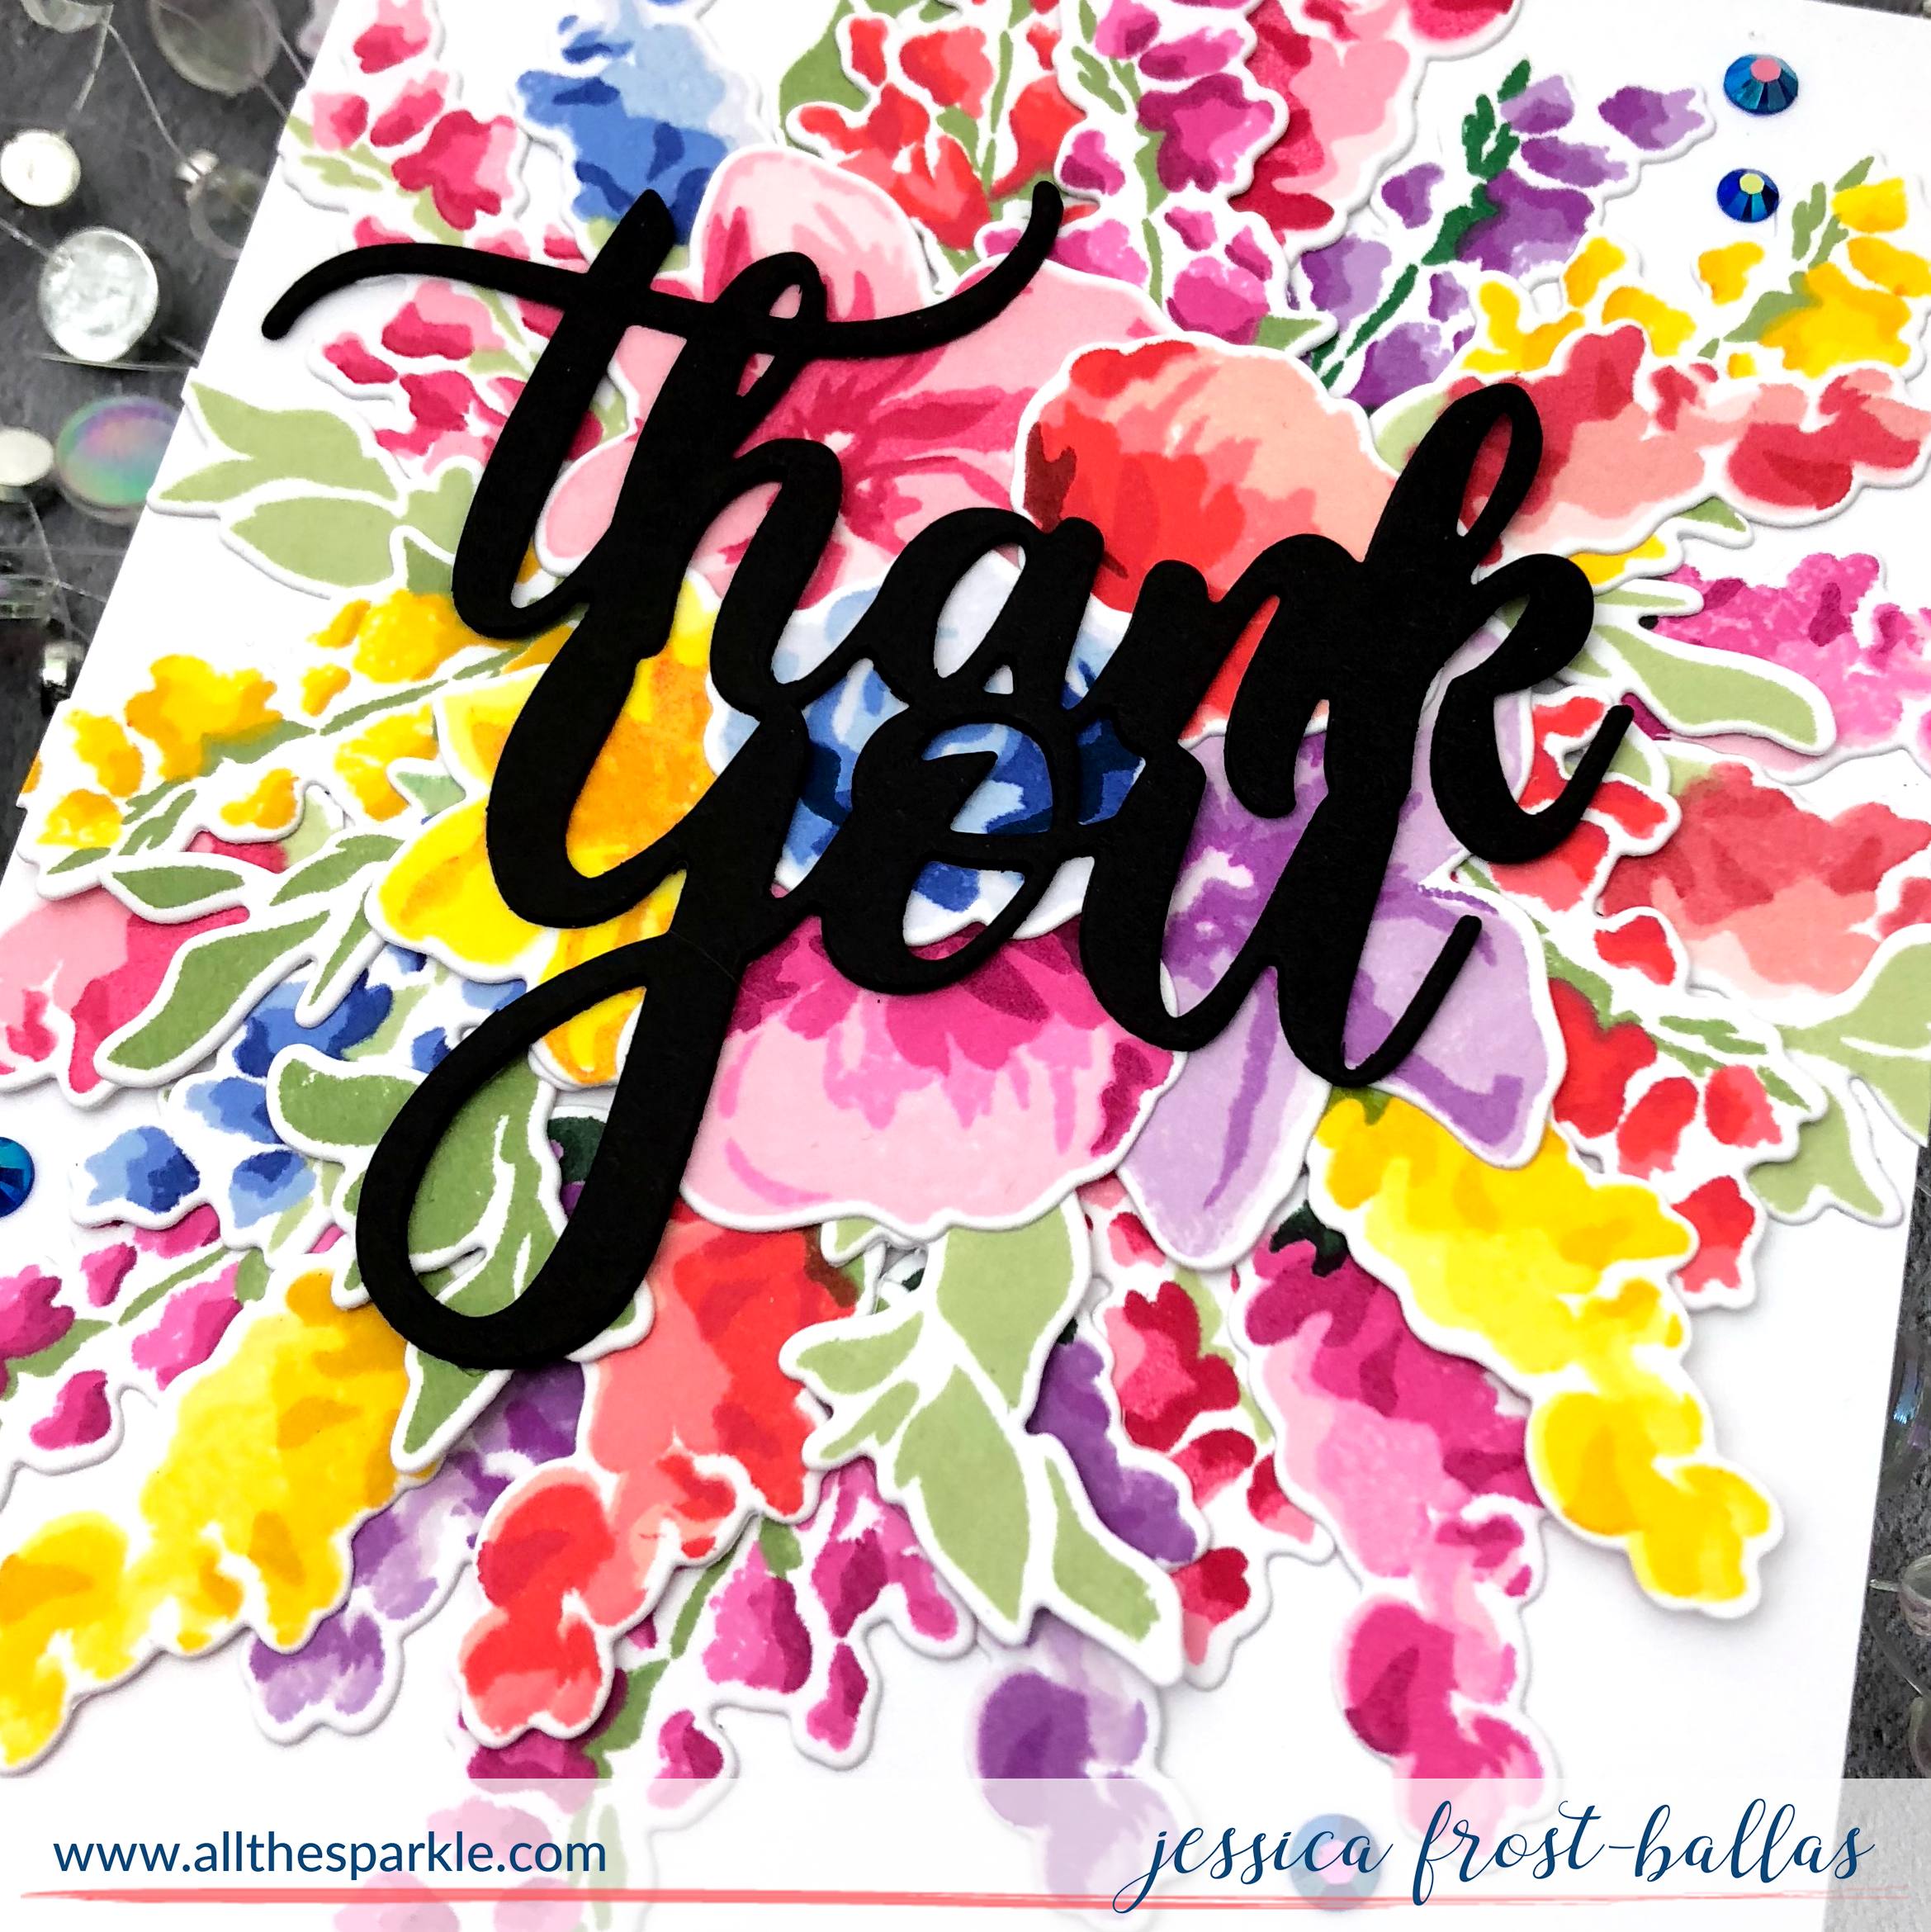 Thank You by Jessica Frost-Ballas for Altenew